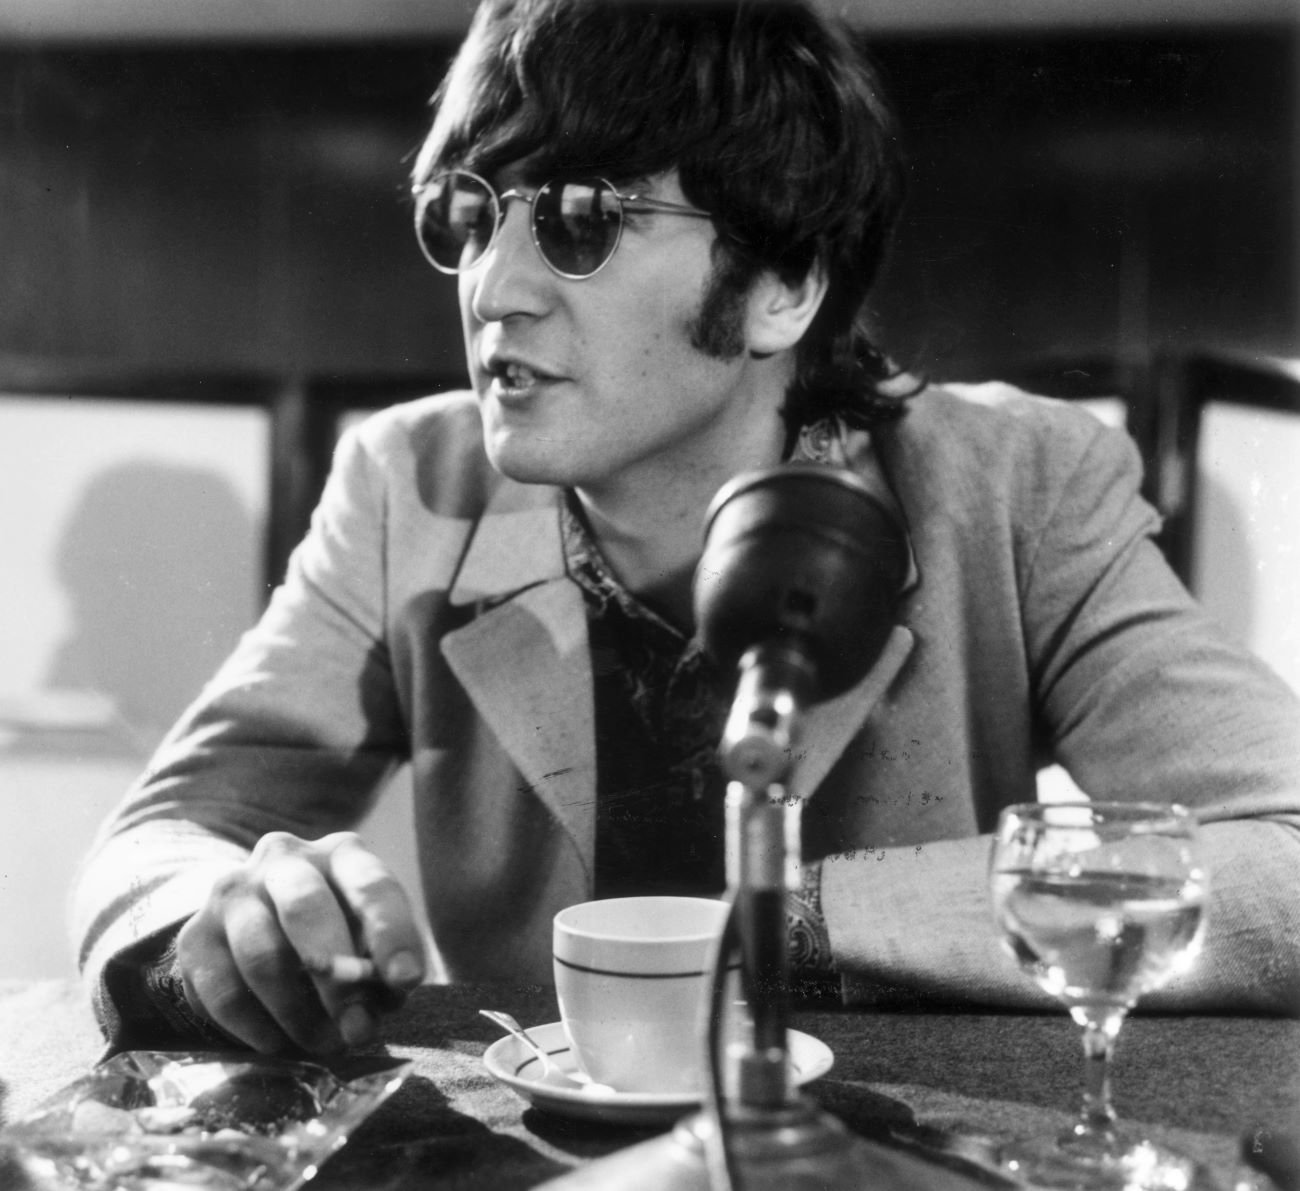 A black and white picture of John Lennon sitting at a table in front of a microphone.